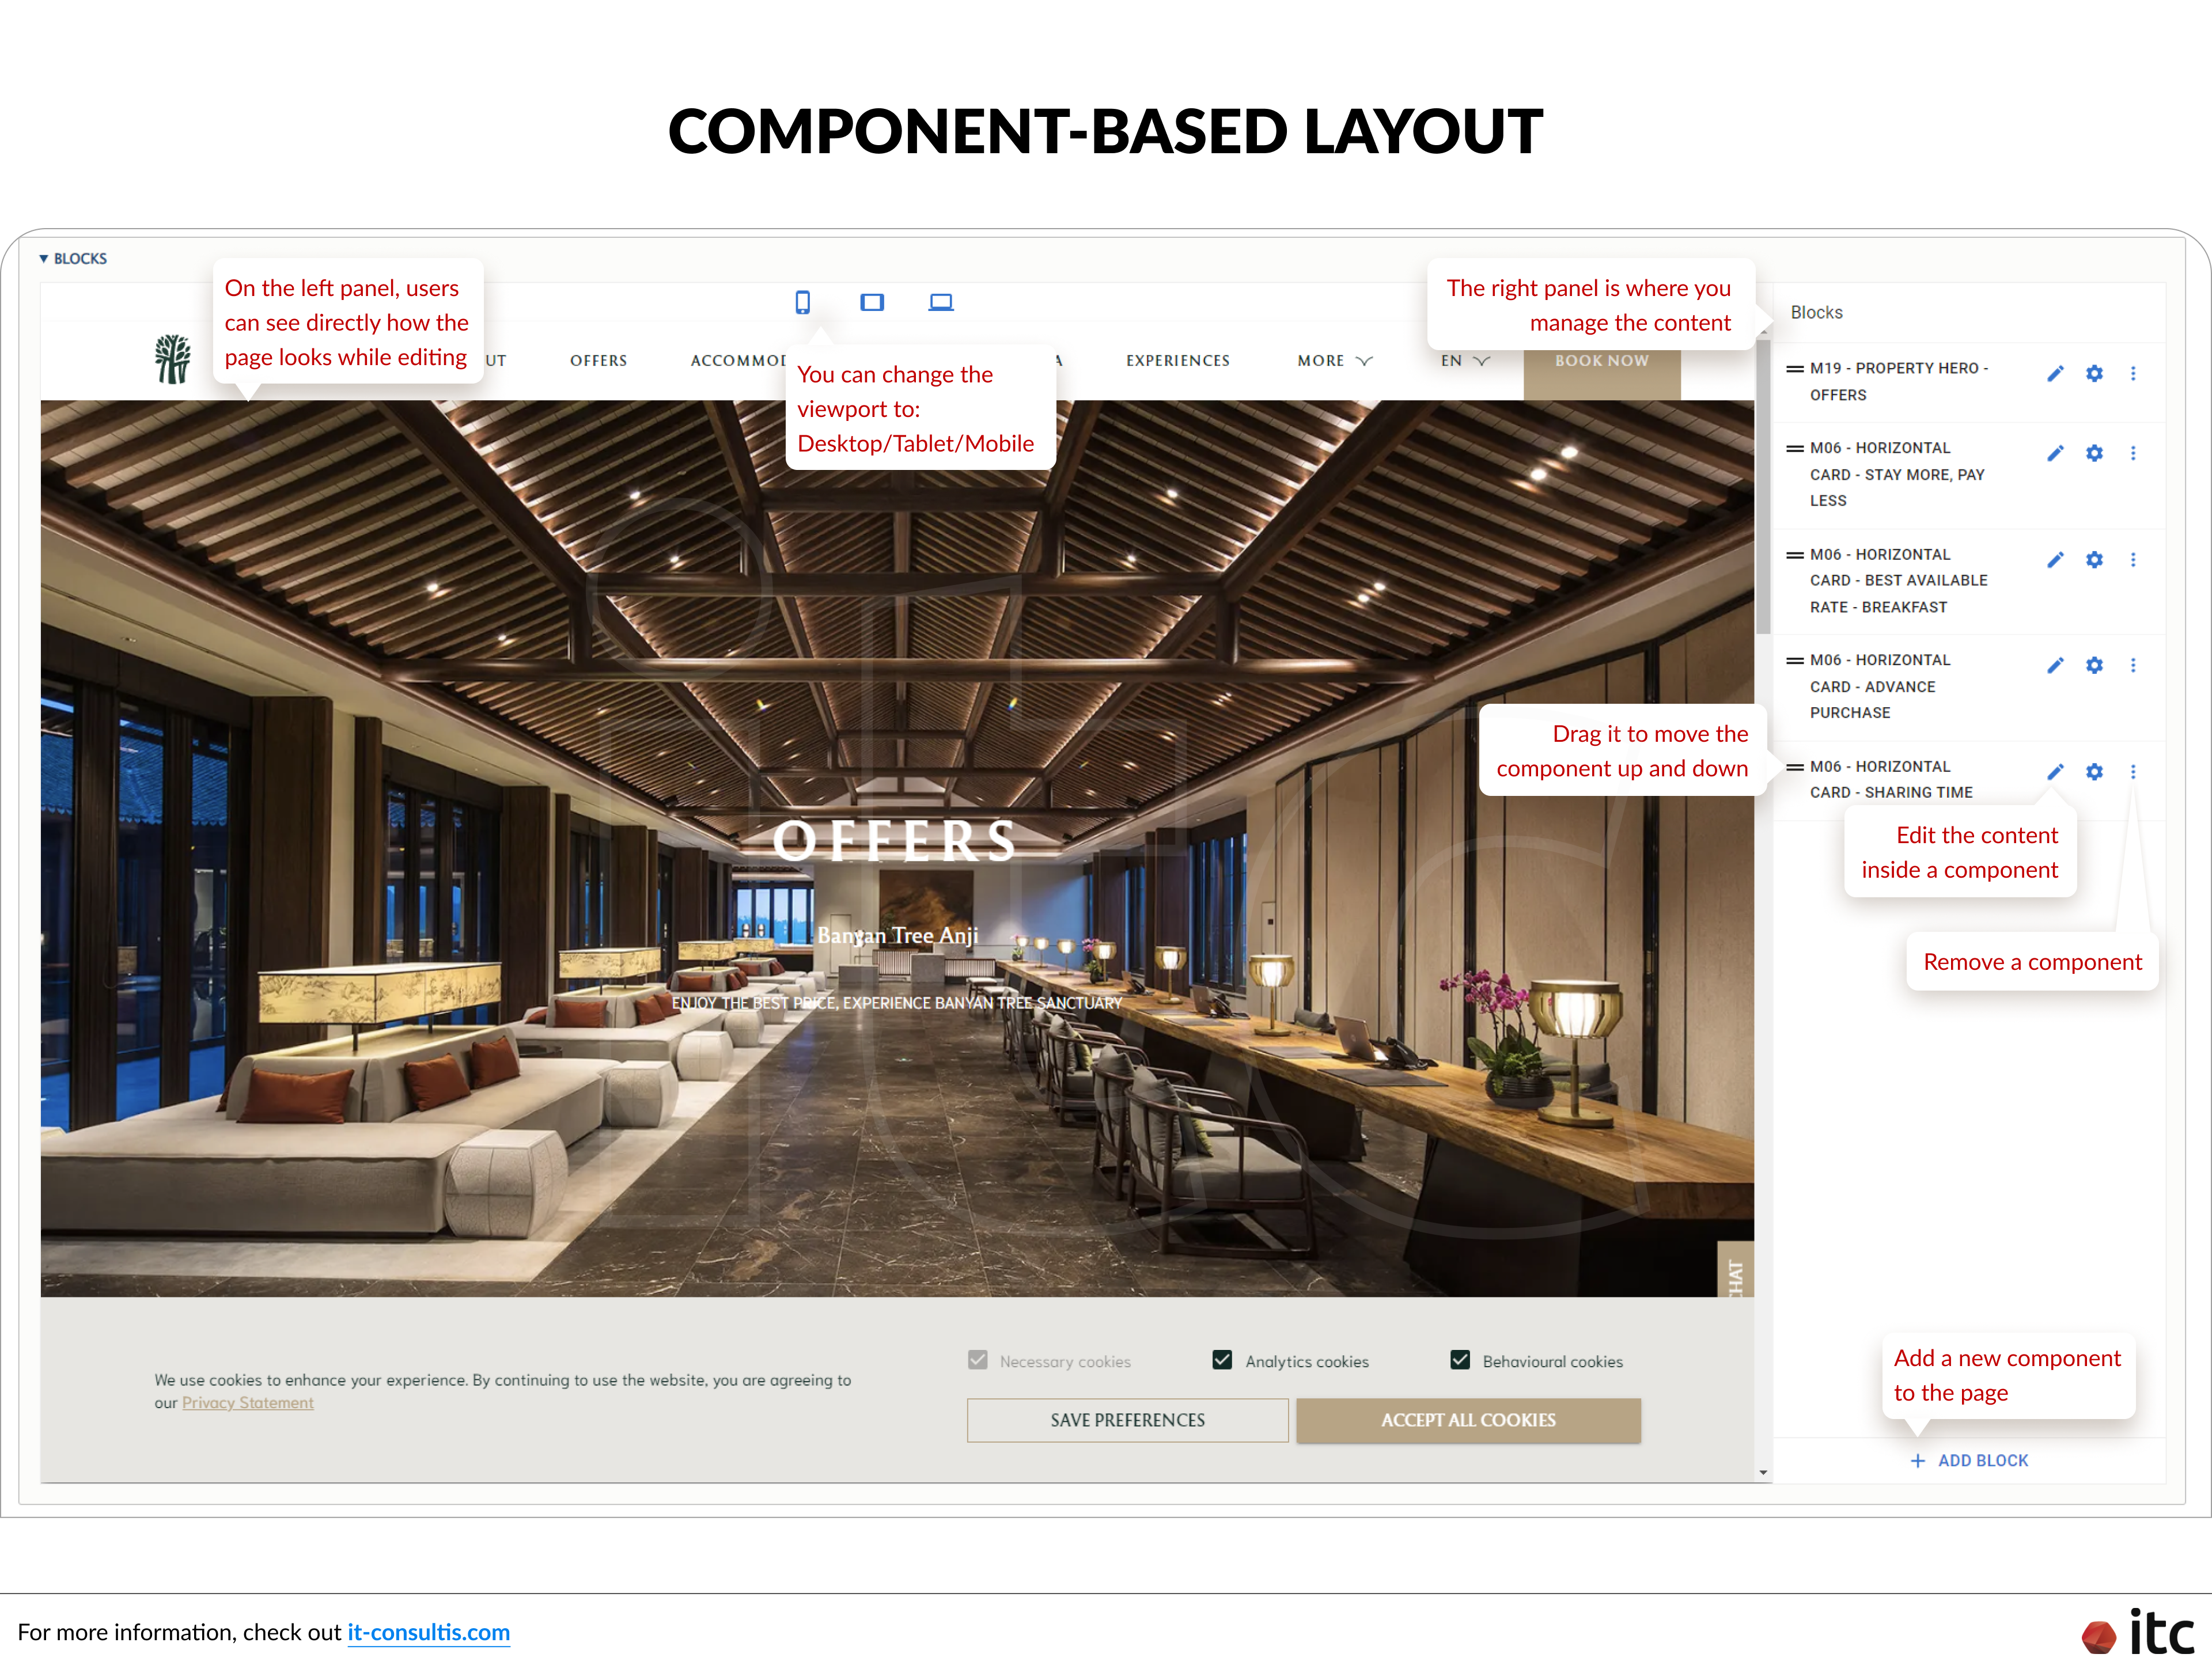 The component-based layout for website development with Drupal, which allows admins to easily add and modify the page layouts